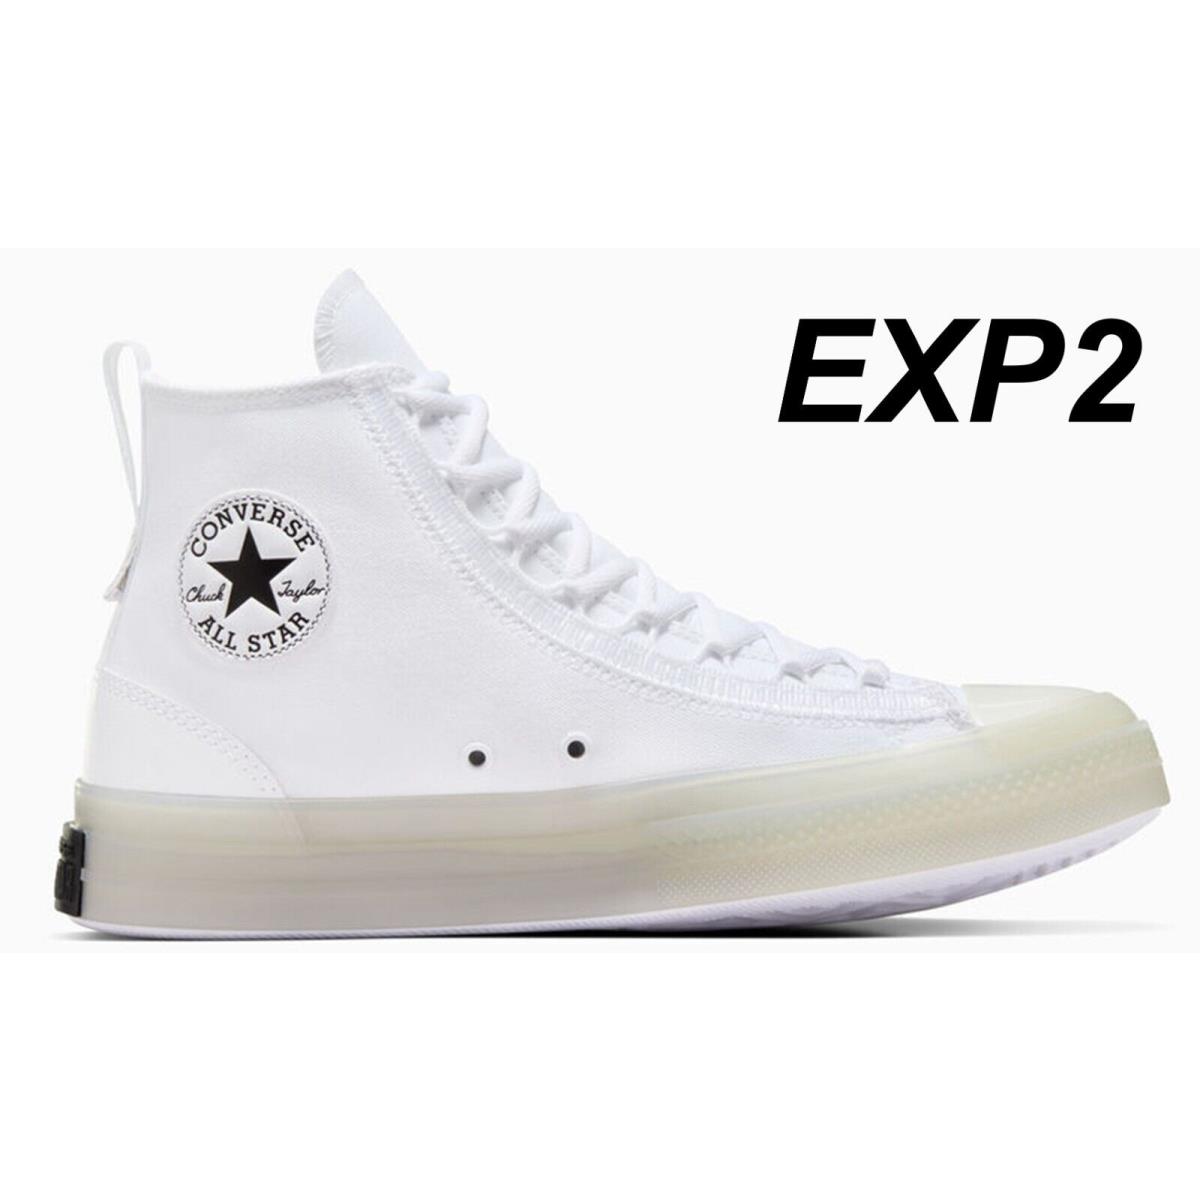 Converse Chuck Taylor All Star CX EXP2 High Top Shoes Limited Edition White